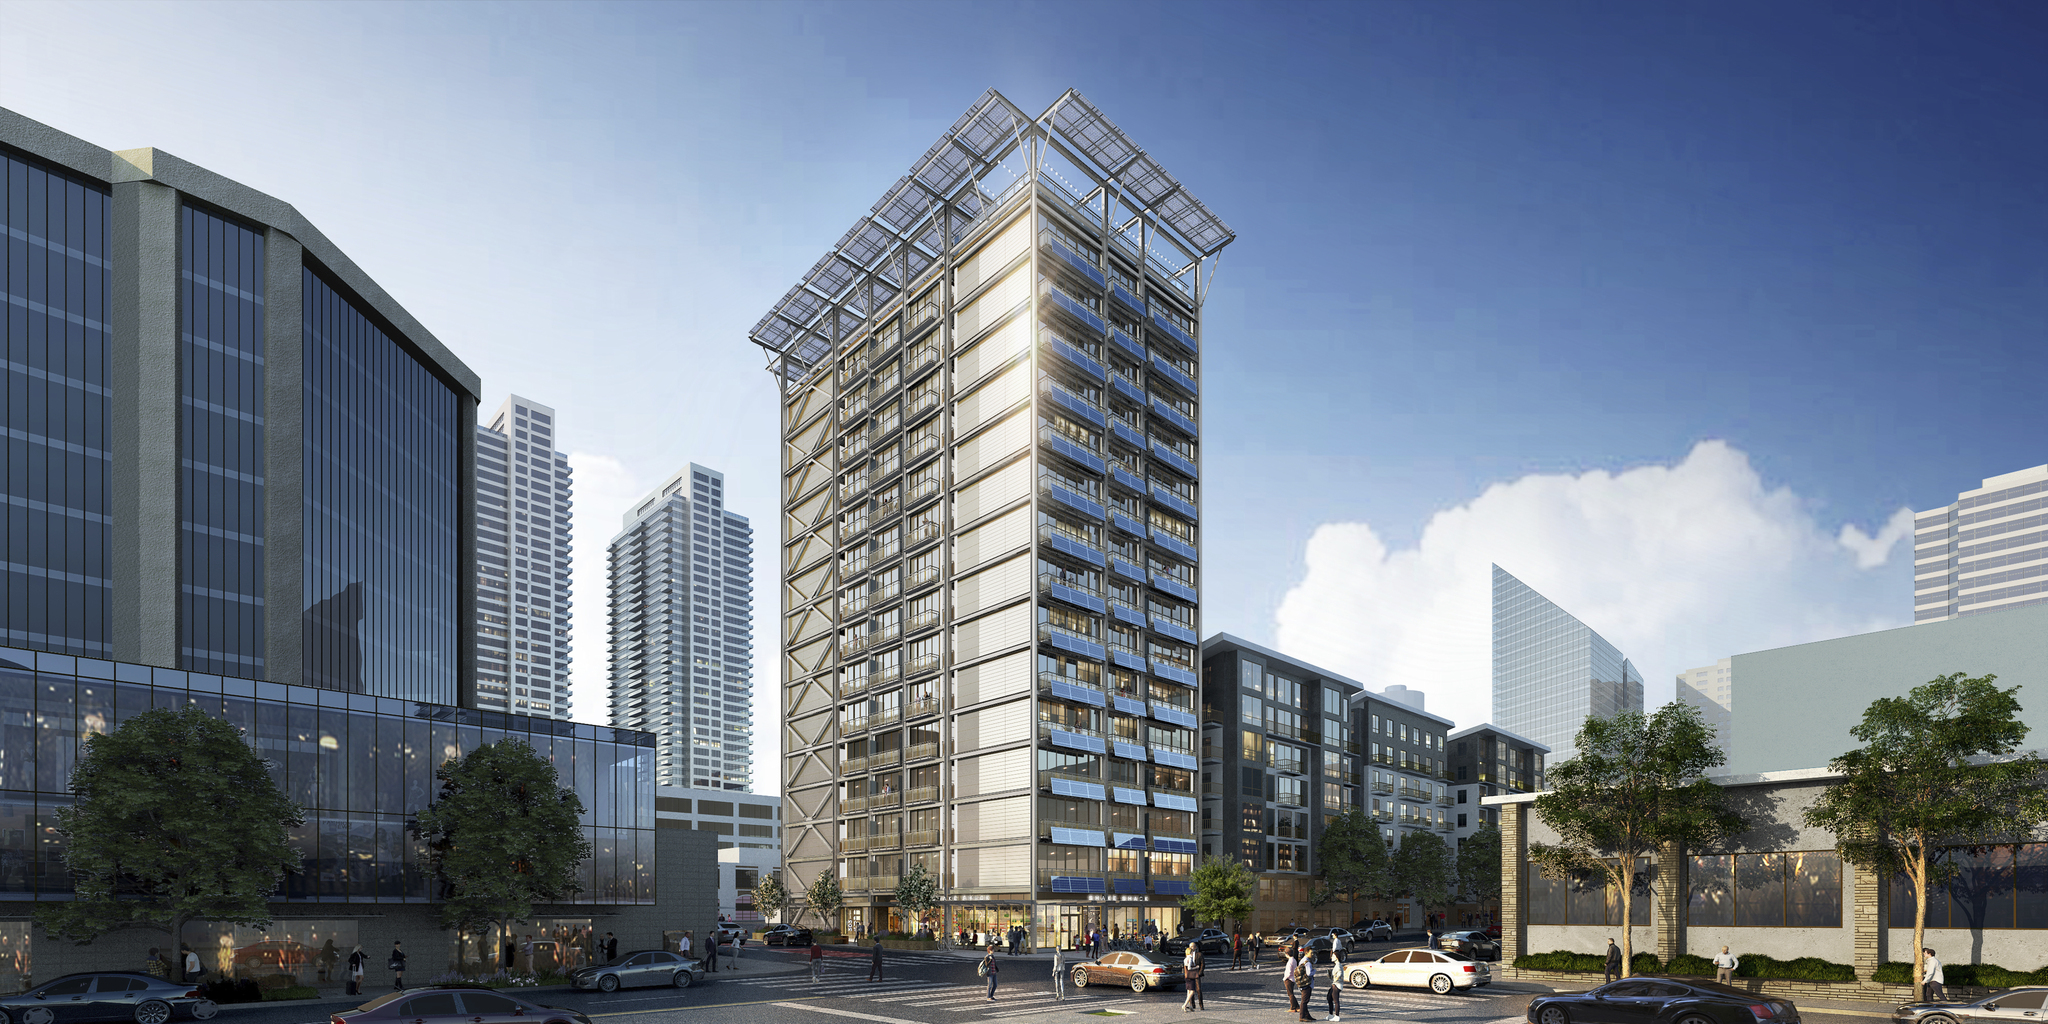 Seattle Tech Co. Groundbreaking for the world's first “net zero energy” high-rise apartment building - Twittersmash